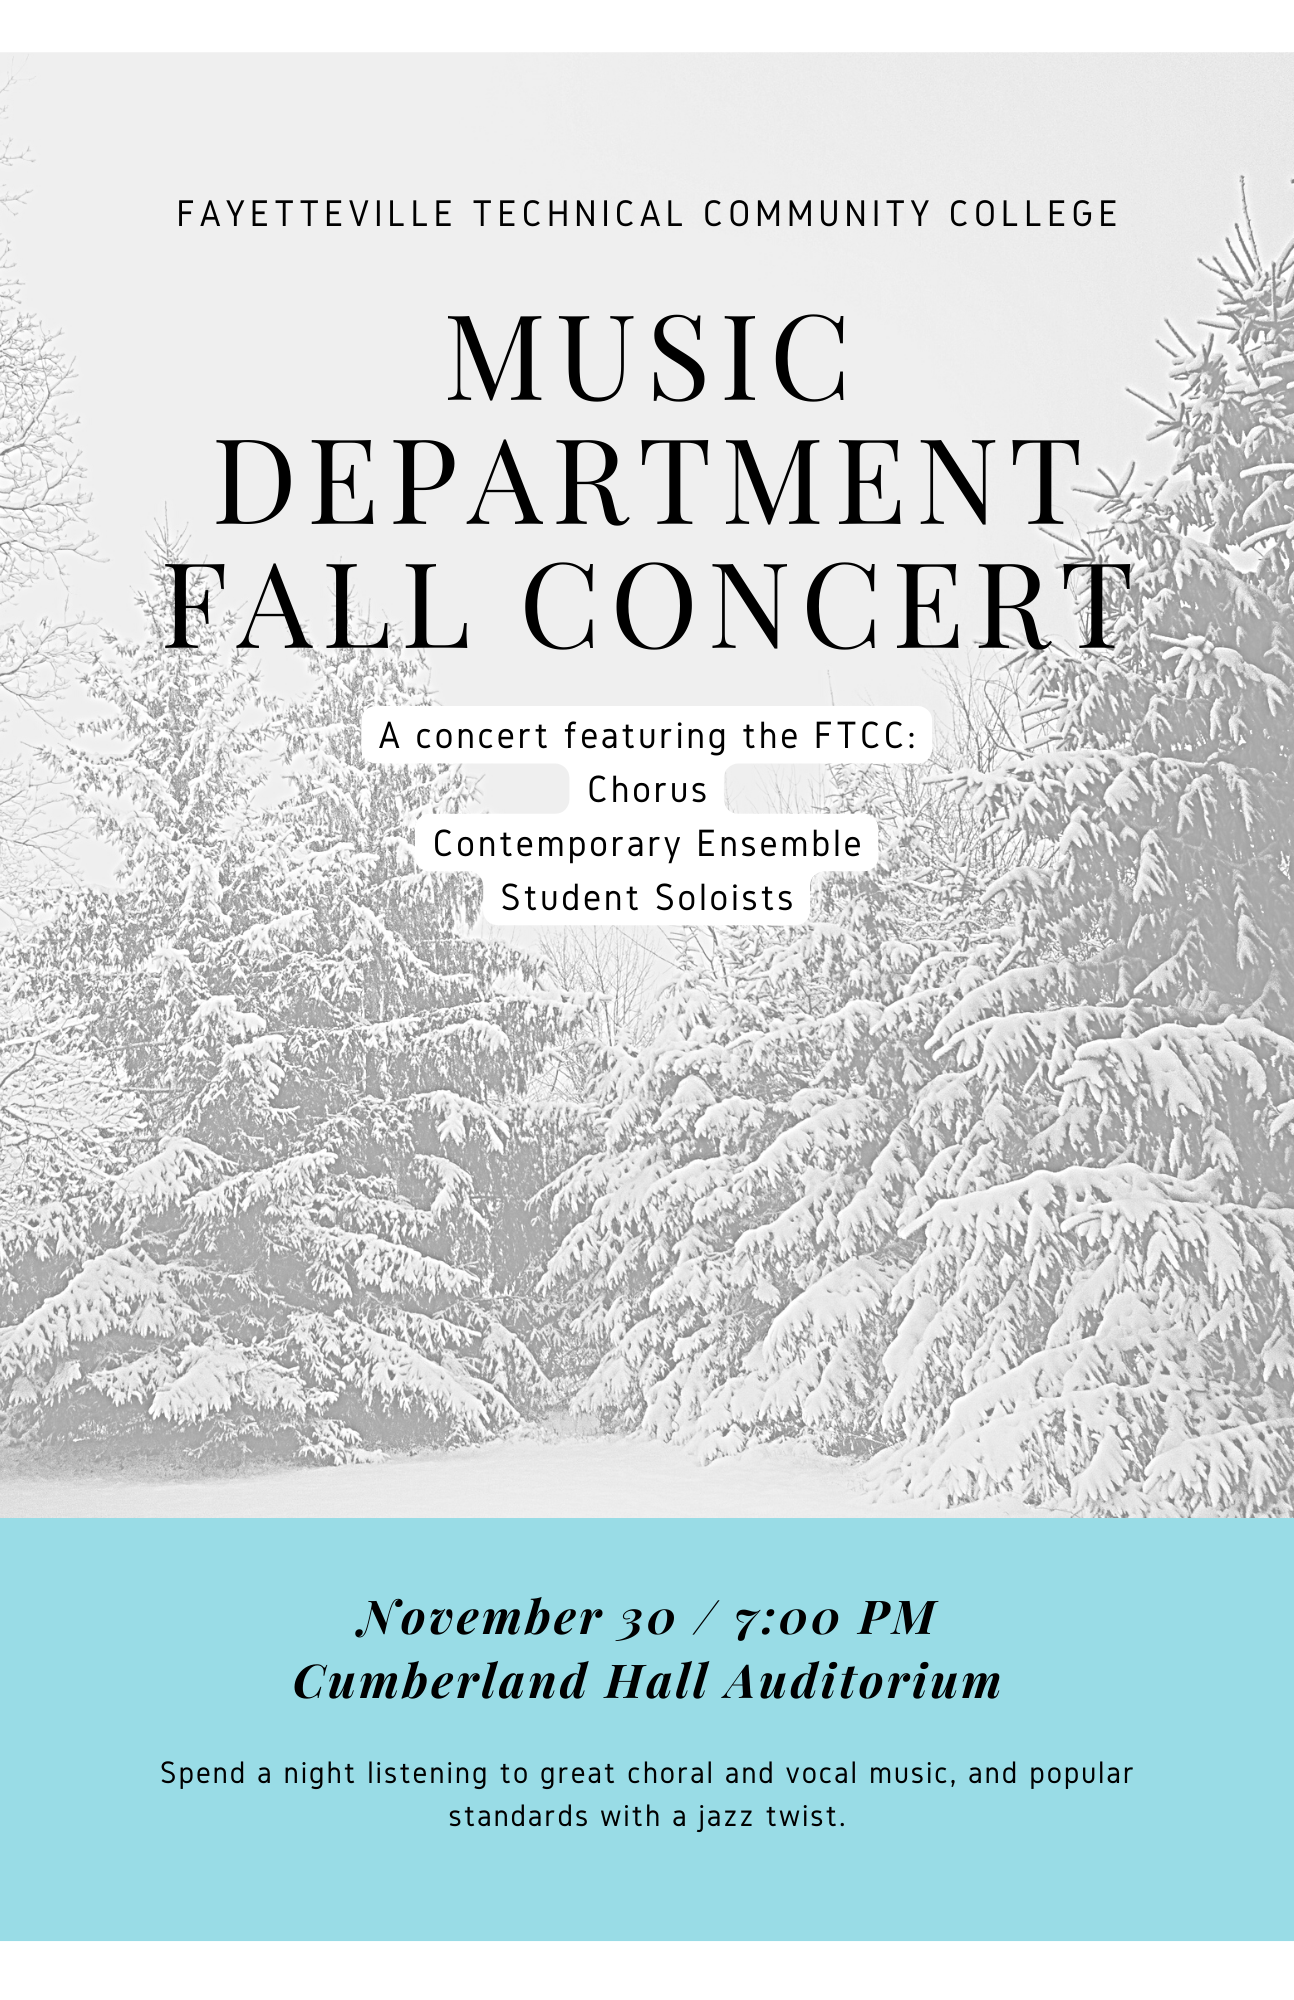 Music Department Fall Concert - Fayetteville Technical Community College